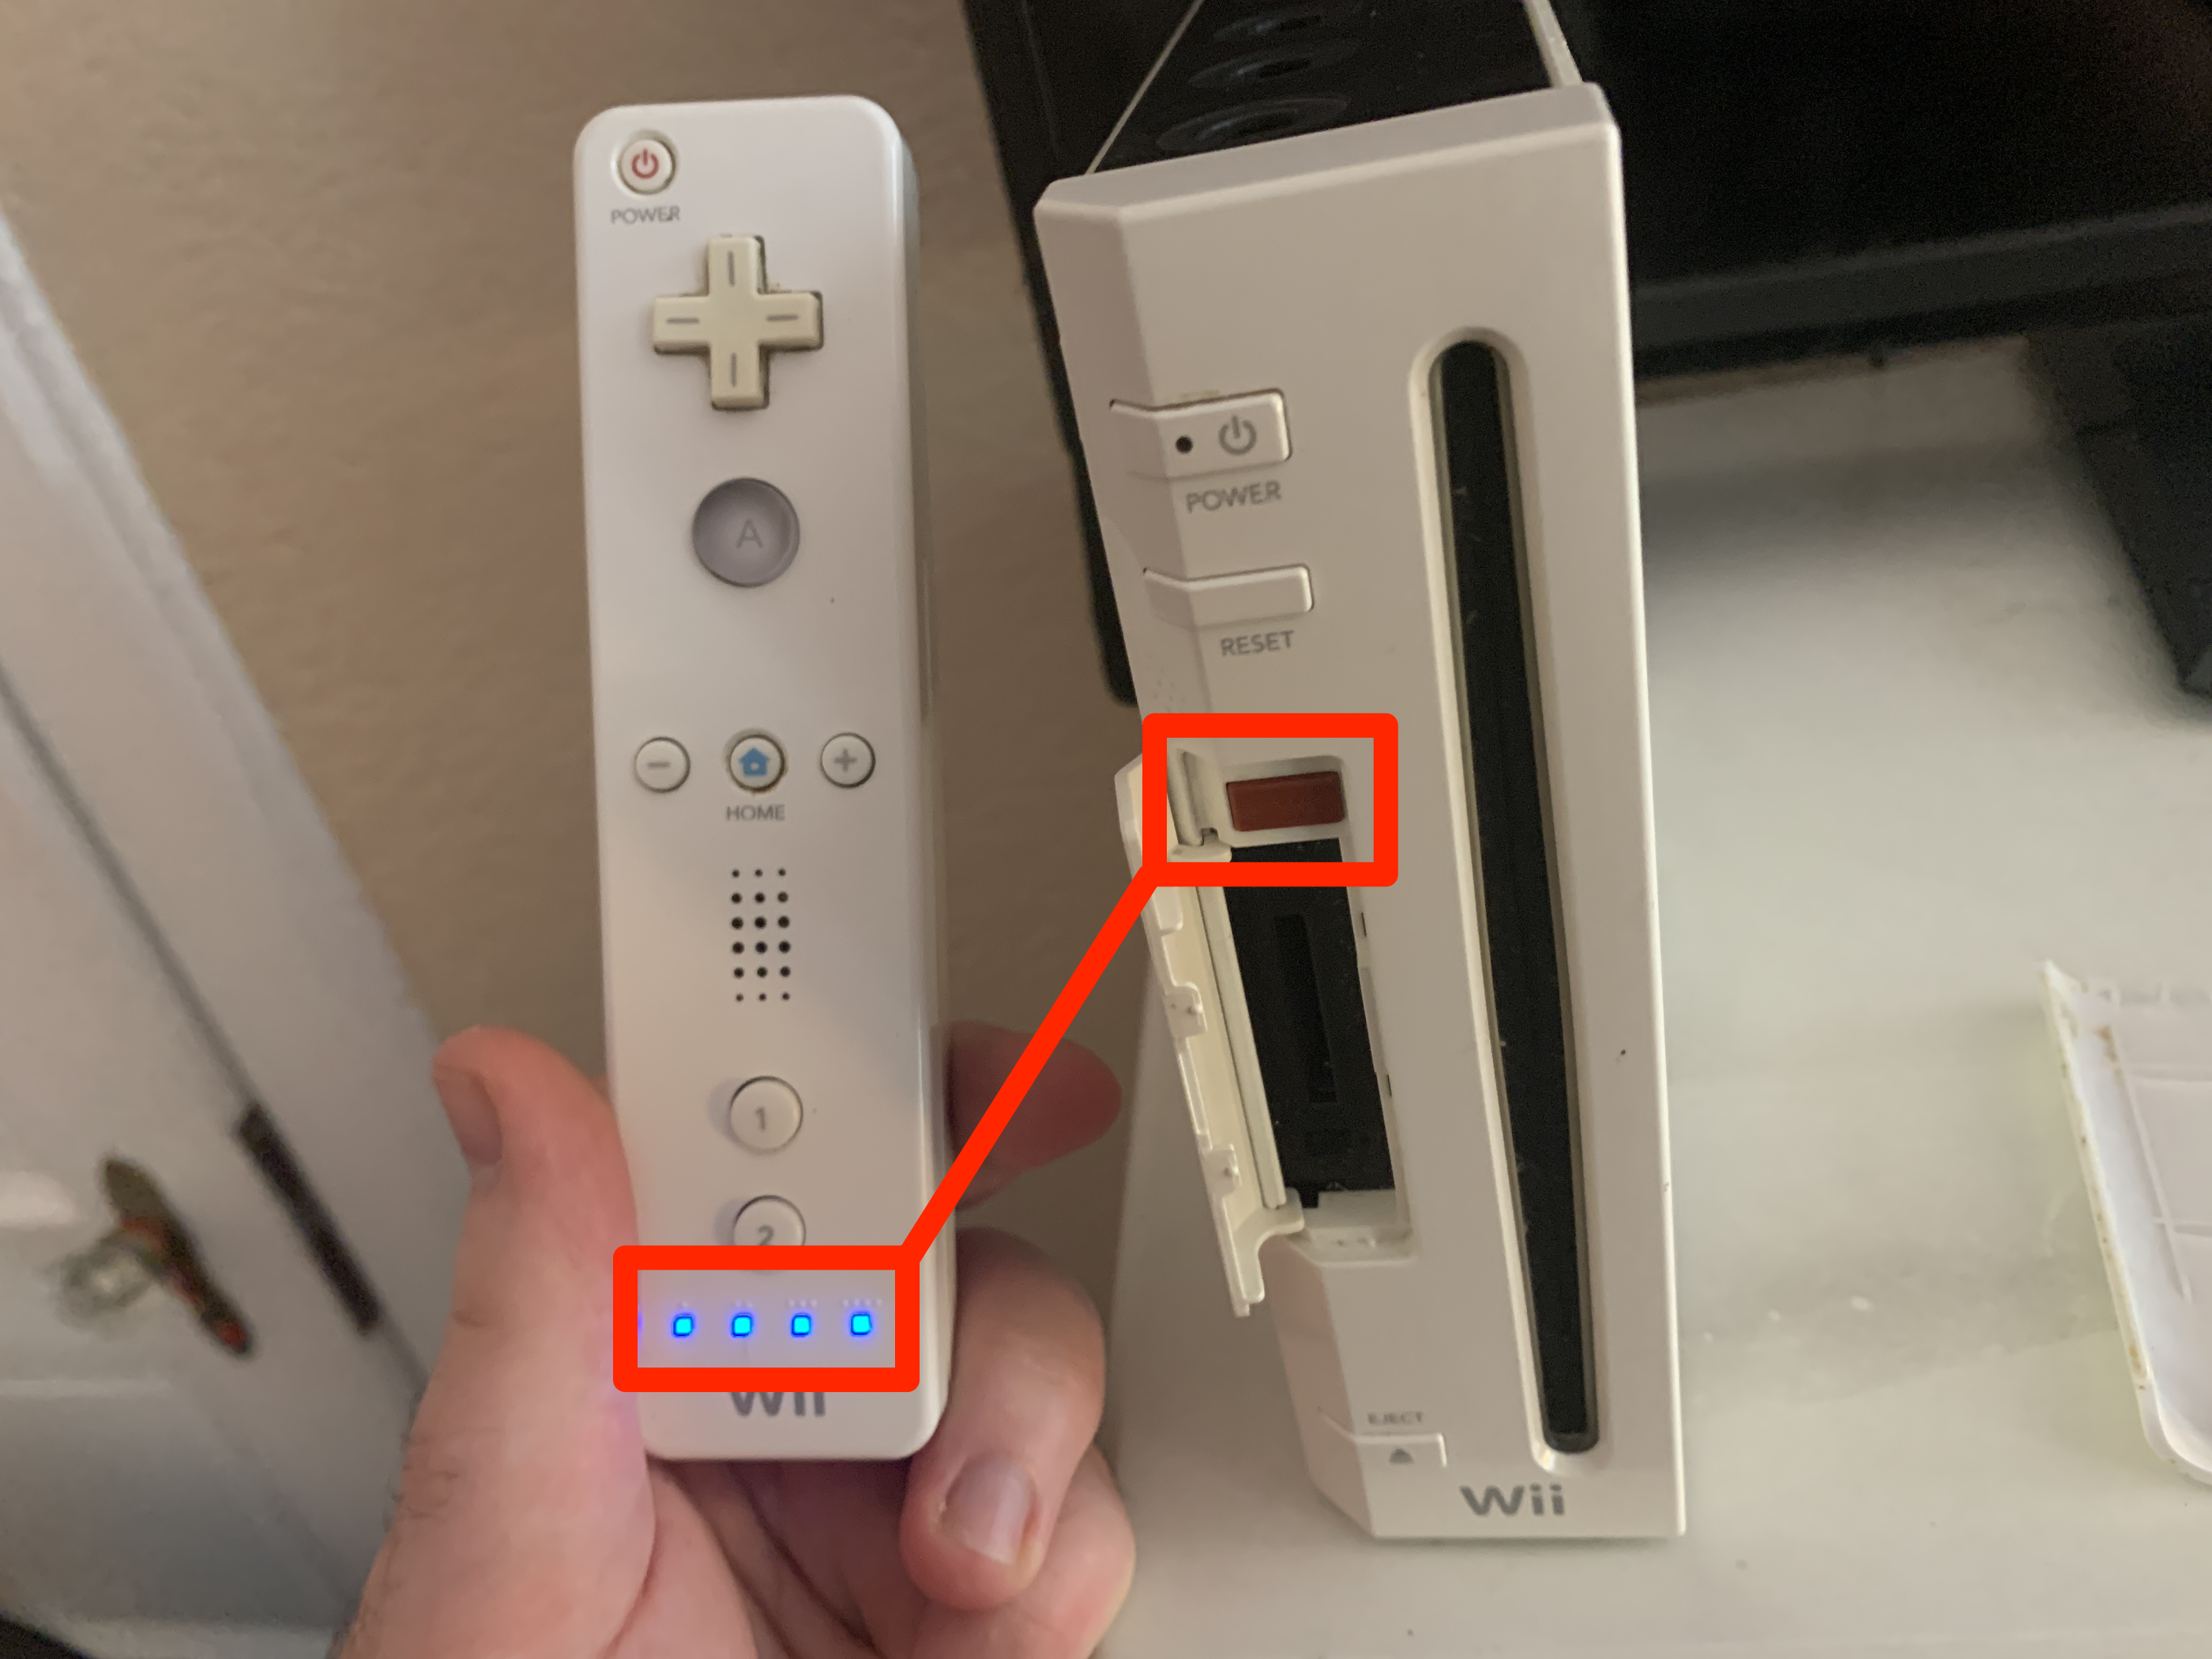 How a Wii Remote to a Wii, Wii PC